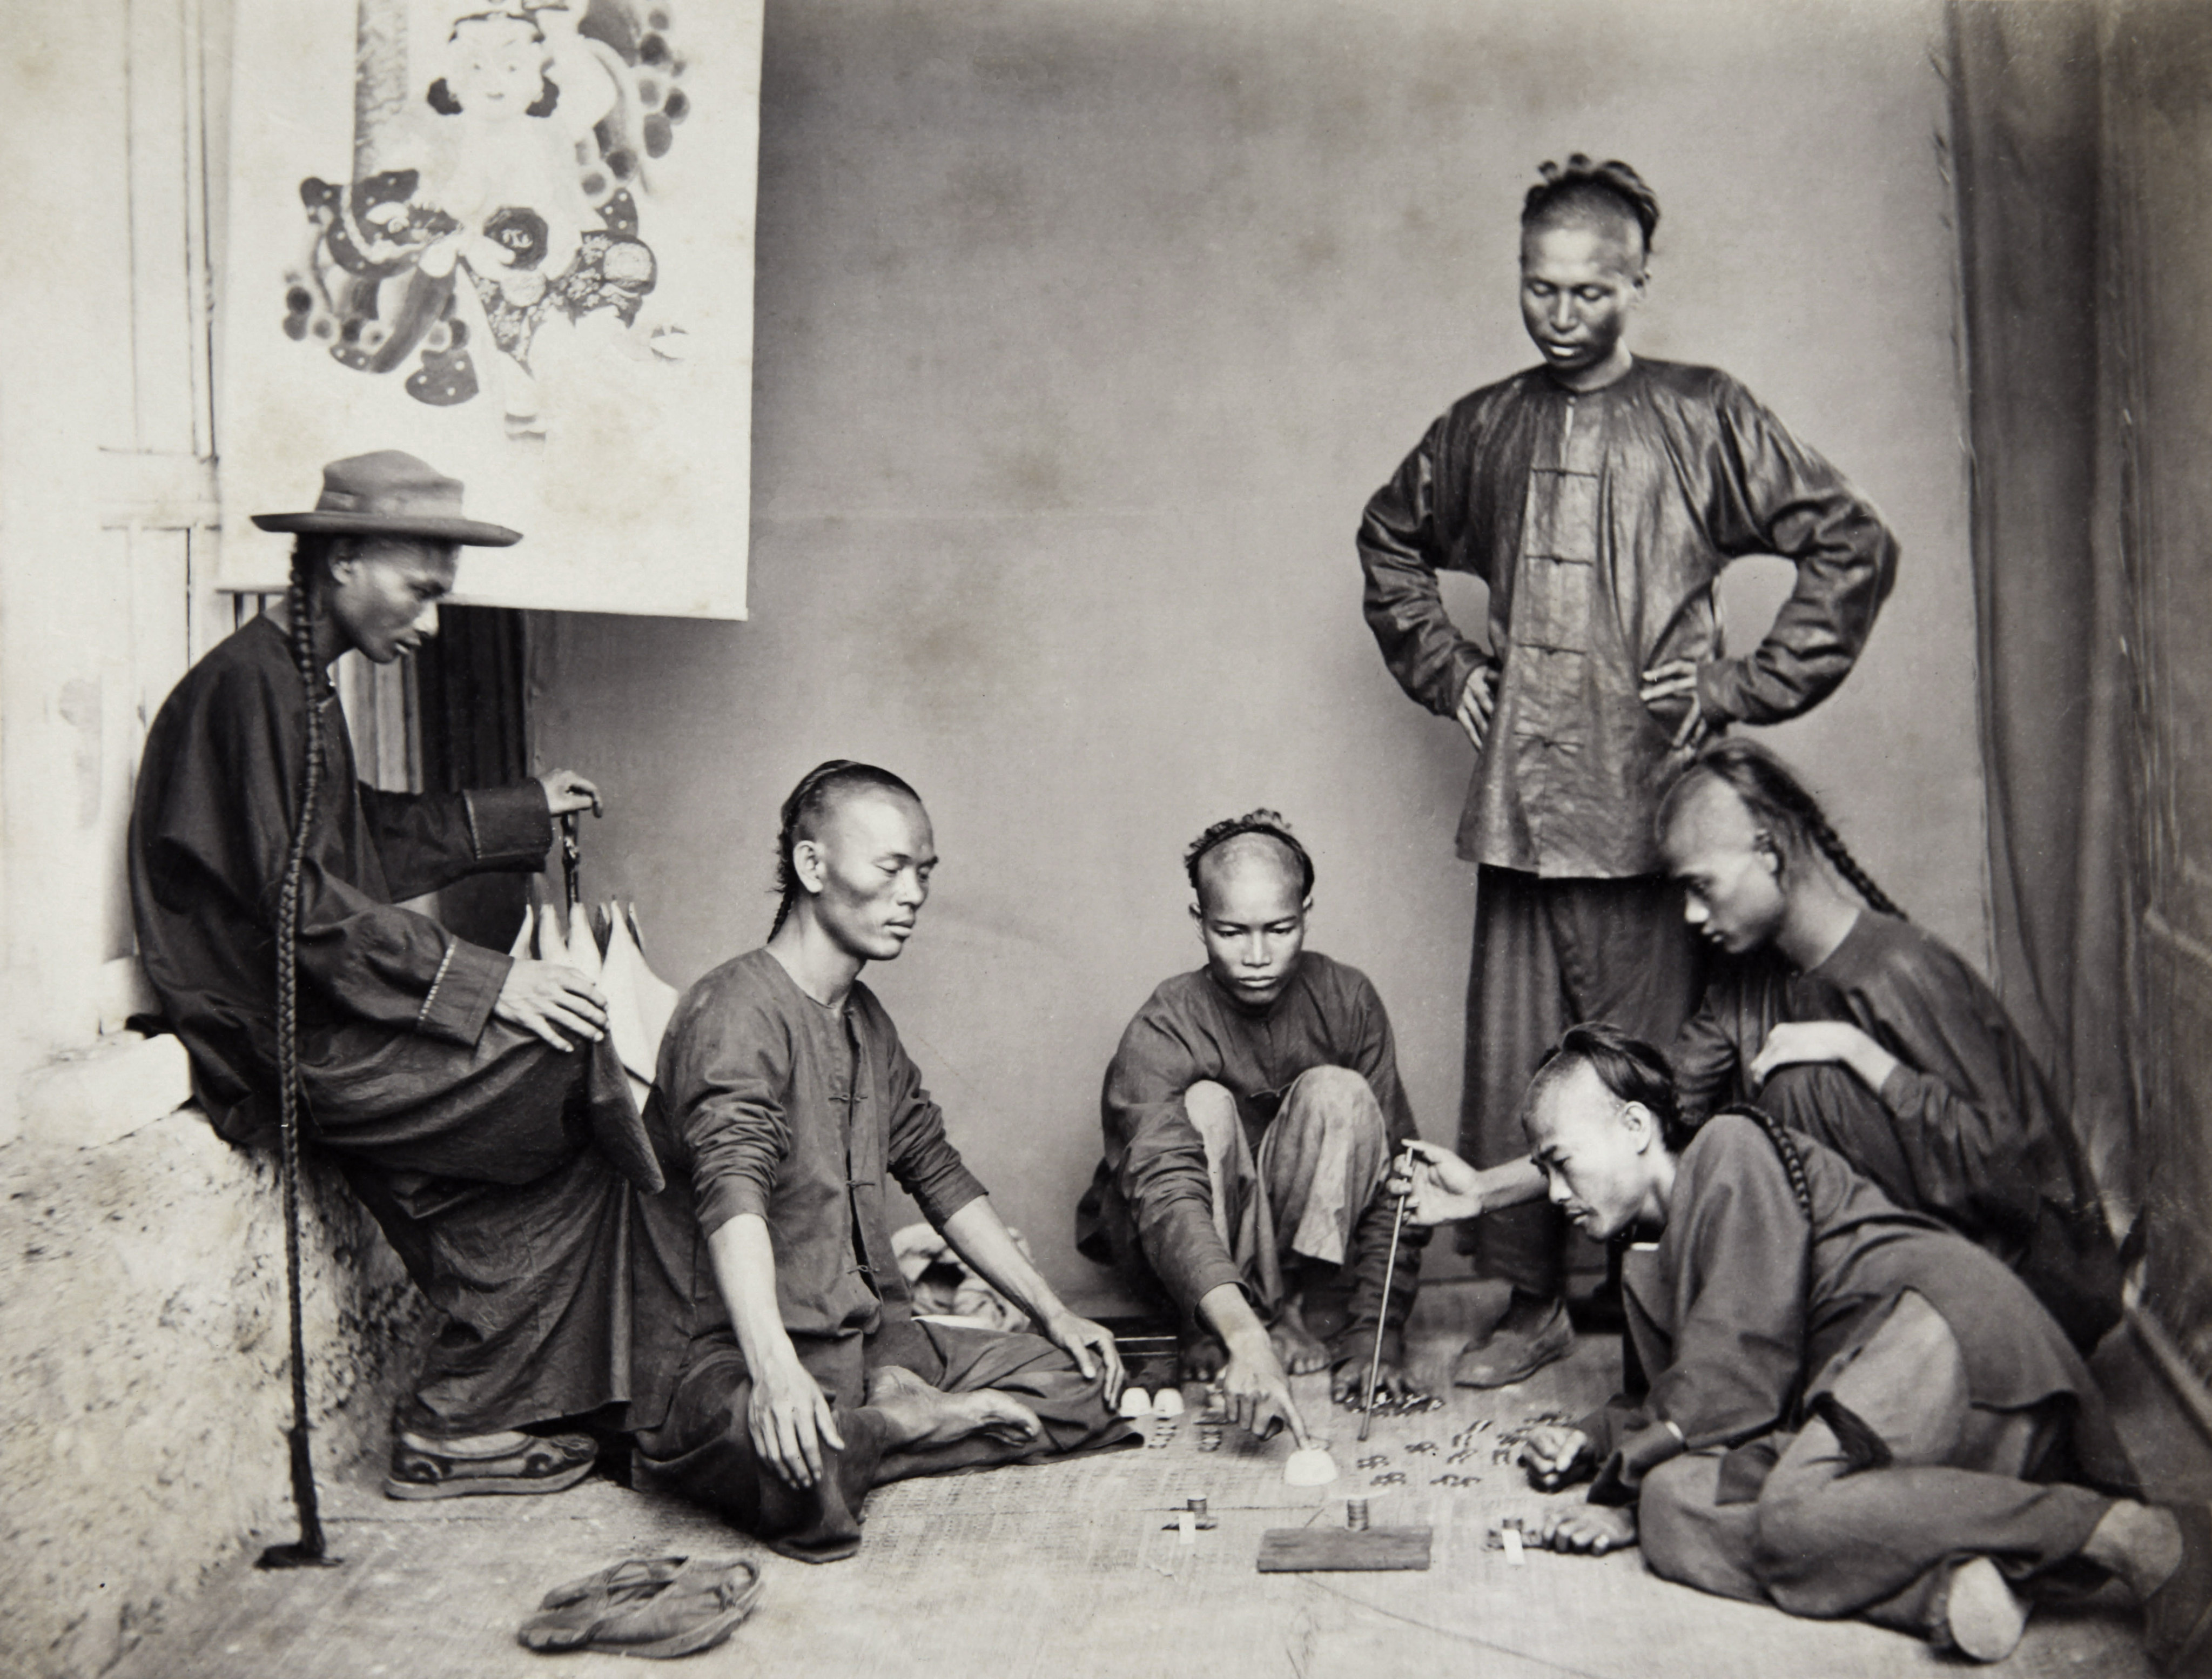 Street gambling in Canton (nowadays called Guangzhou) in southern China circa 1868. Chinese emperors decreed harsh punishments for gamblers, including beheading under Song dynasty rule. Photo: Getty Images